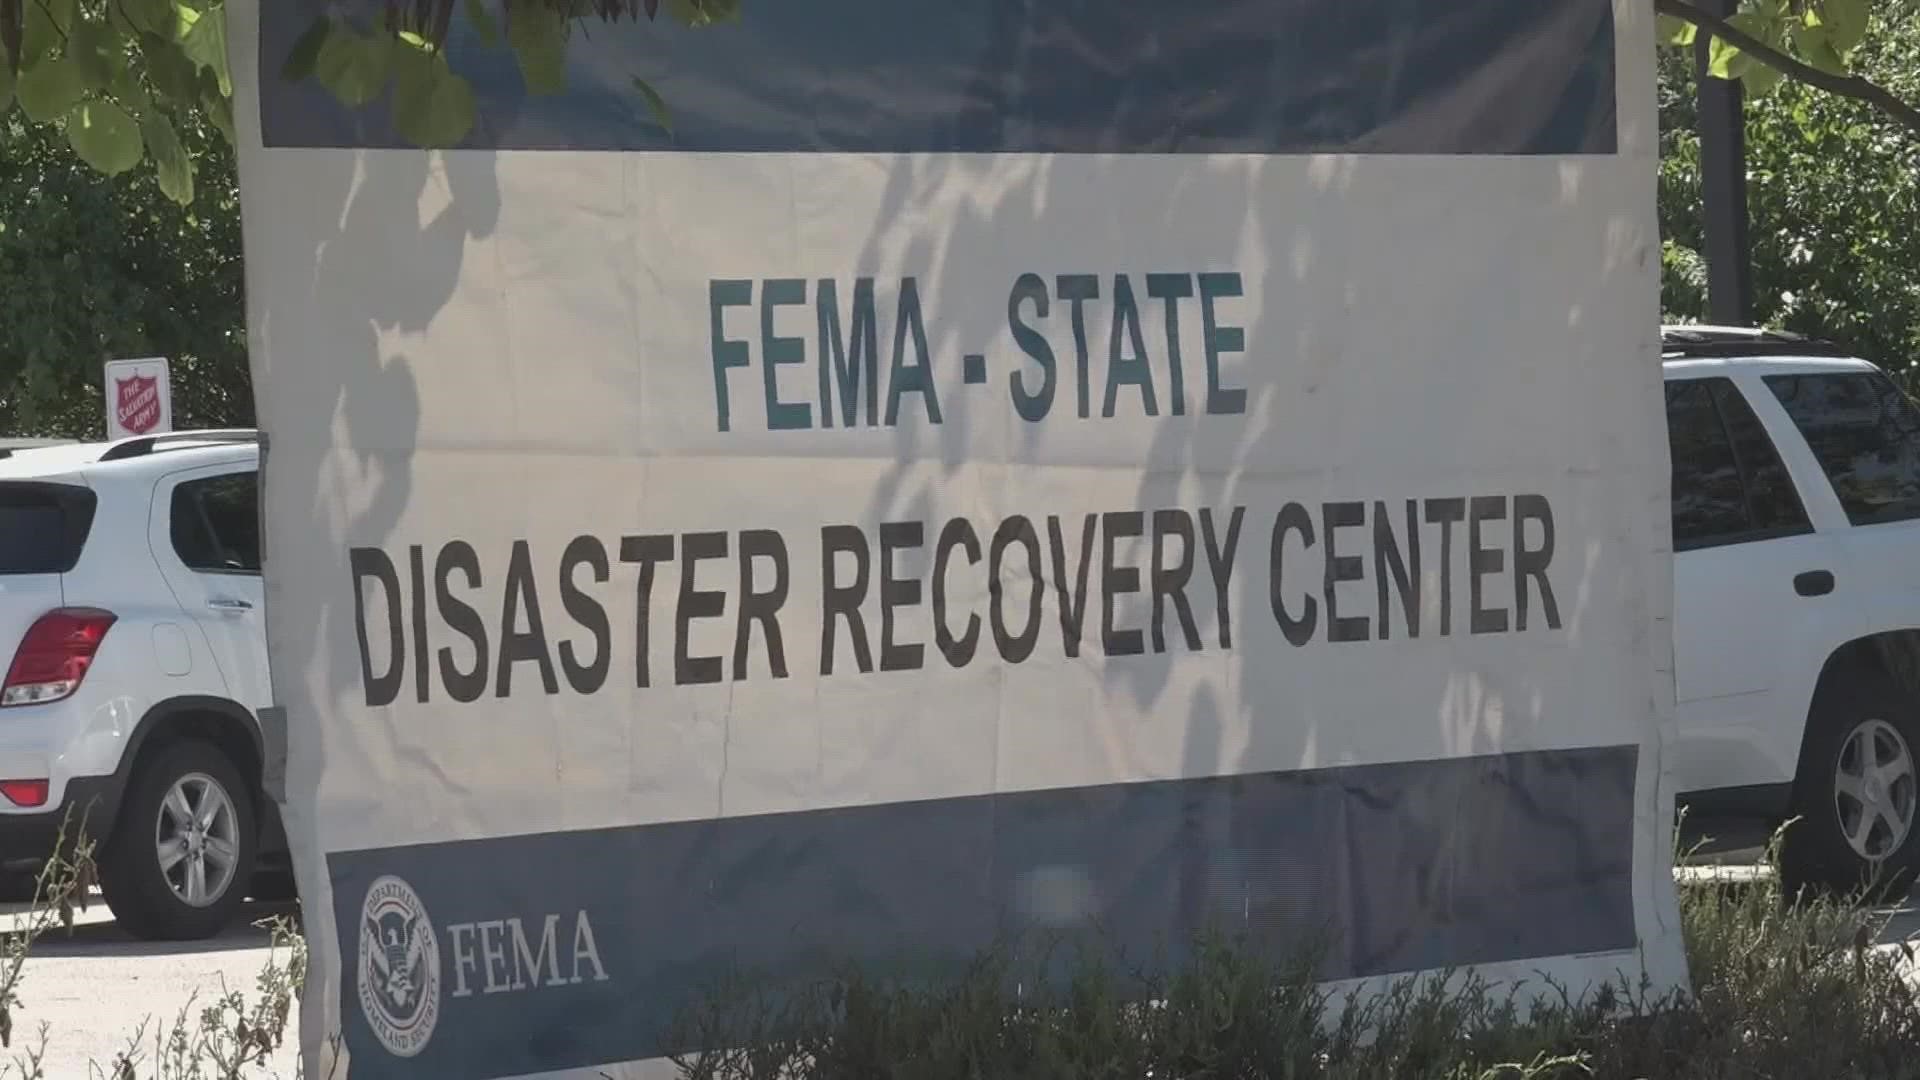 If you still need to apply for FEMA flood assistance, you now have more time. The deadline has been extended to Nov. 7.